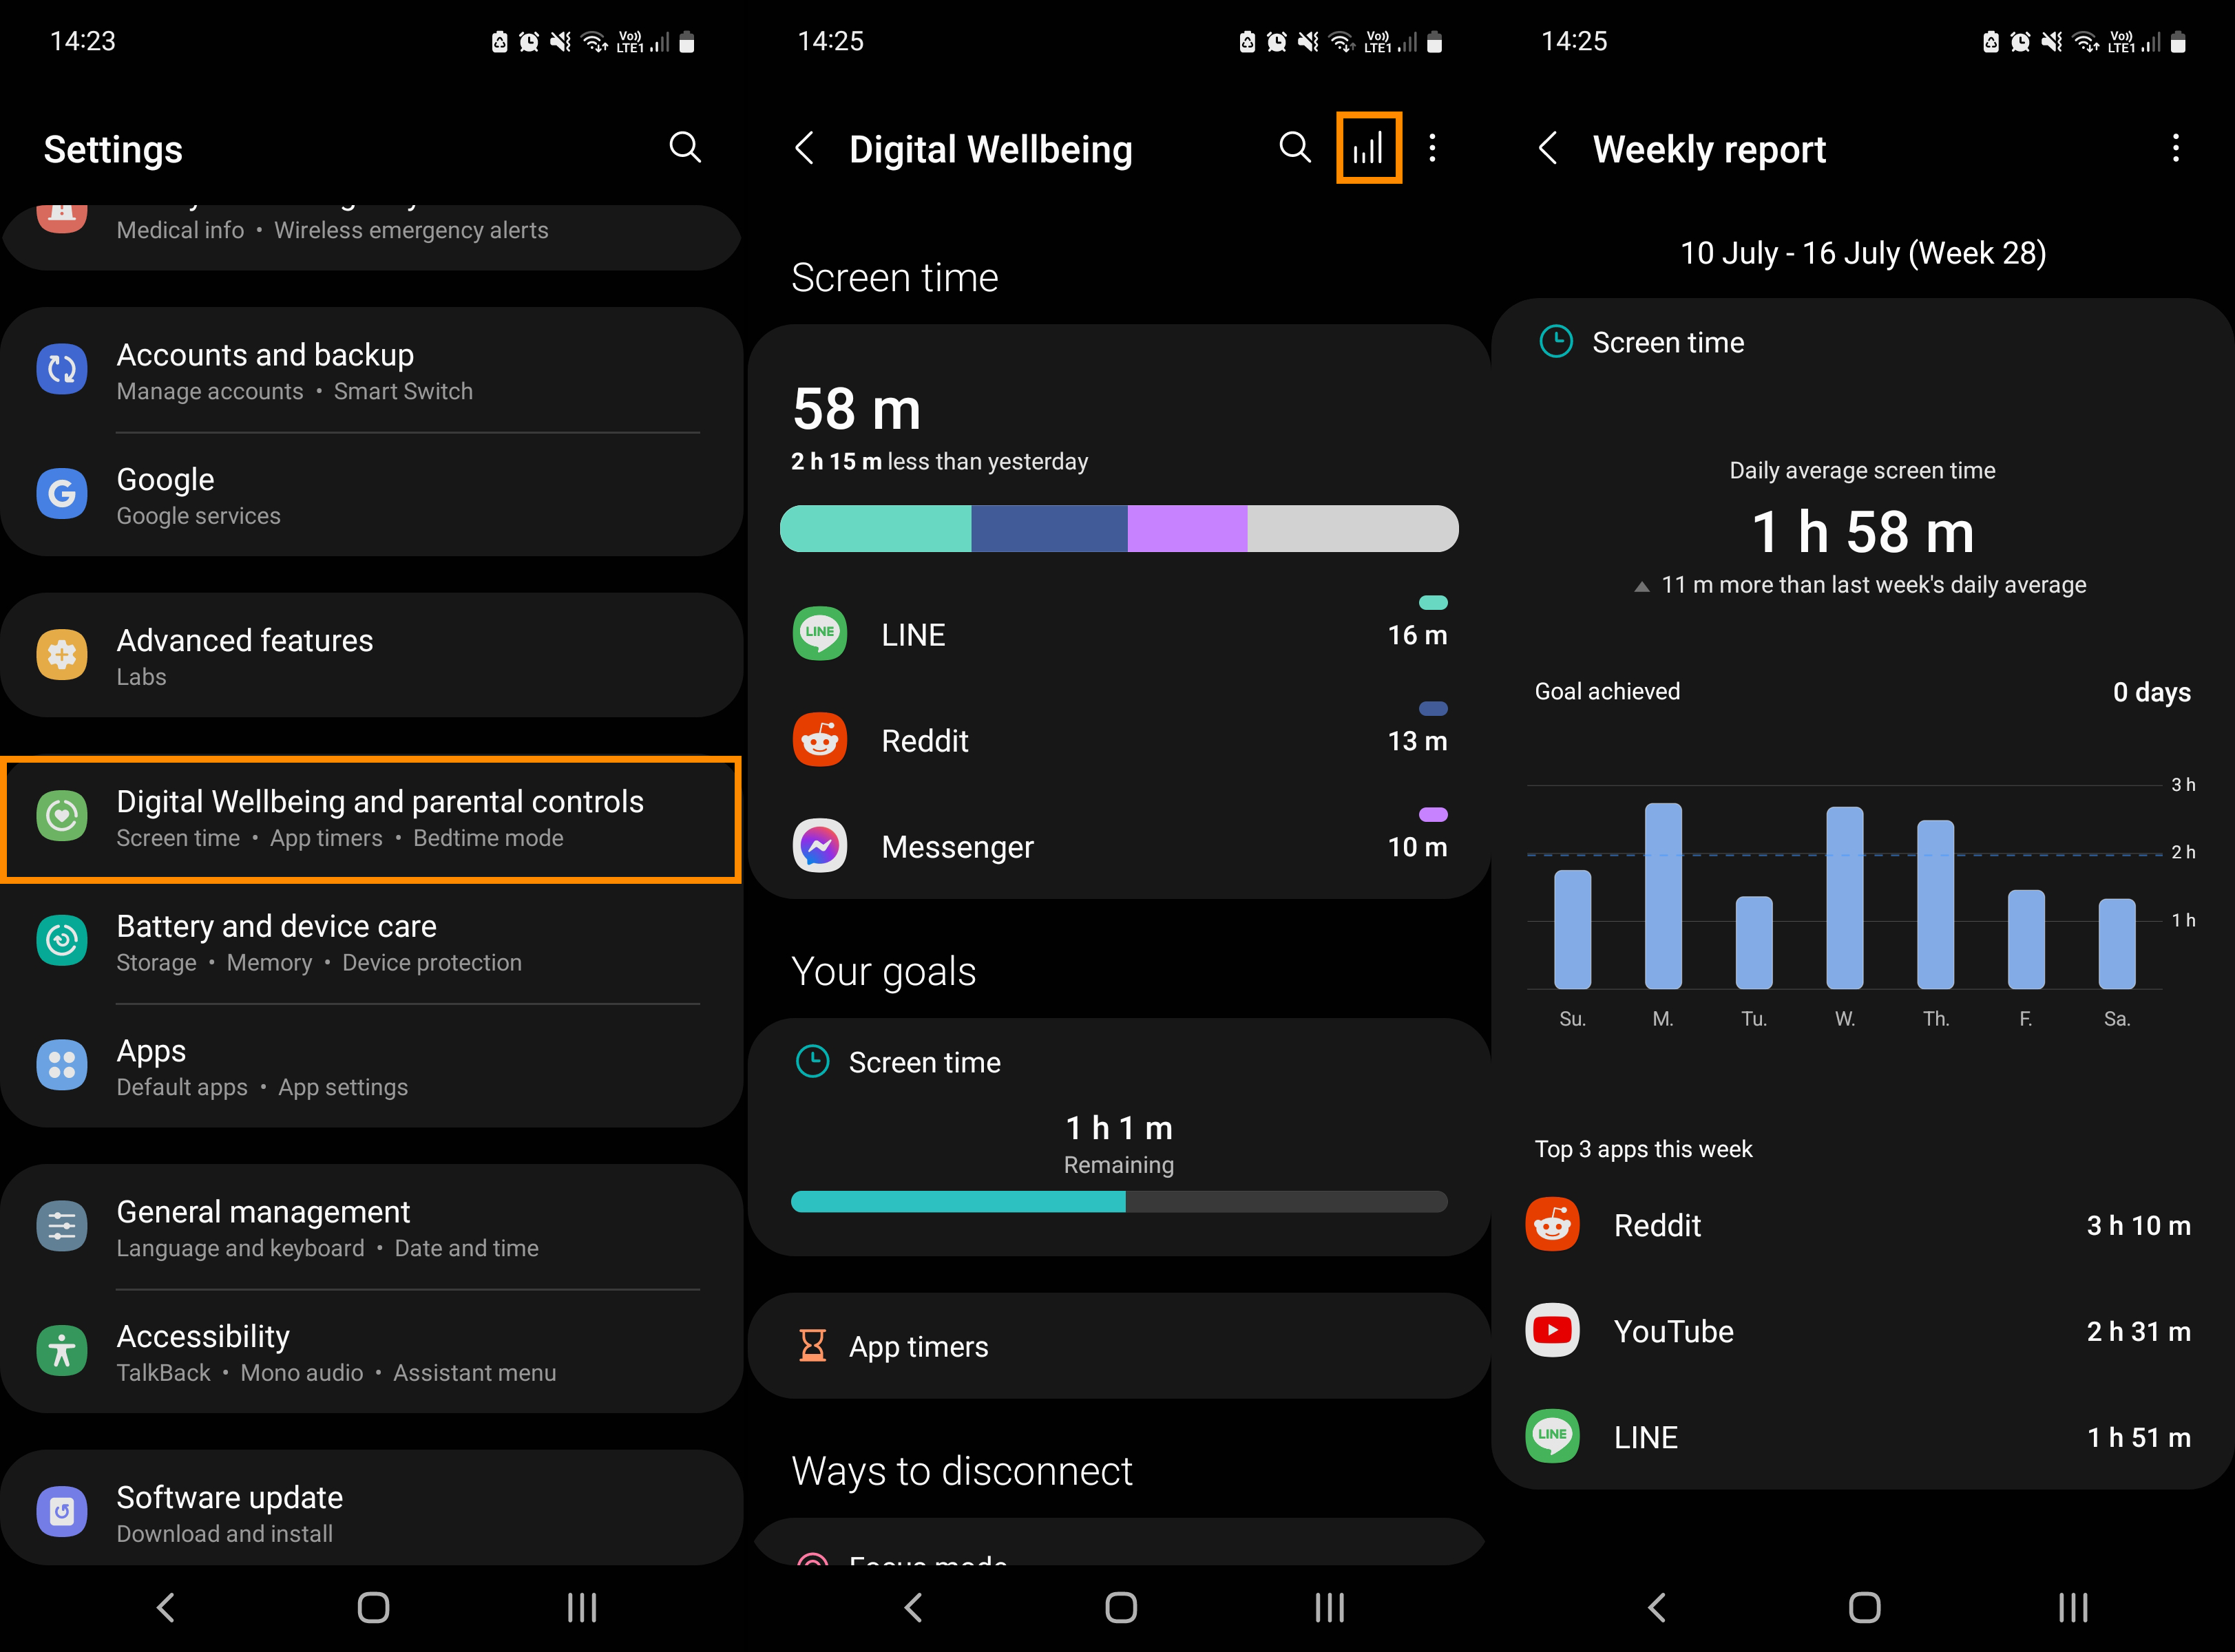 How to check your weekly screen time report on Android